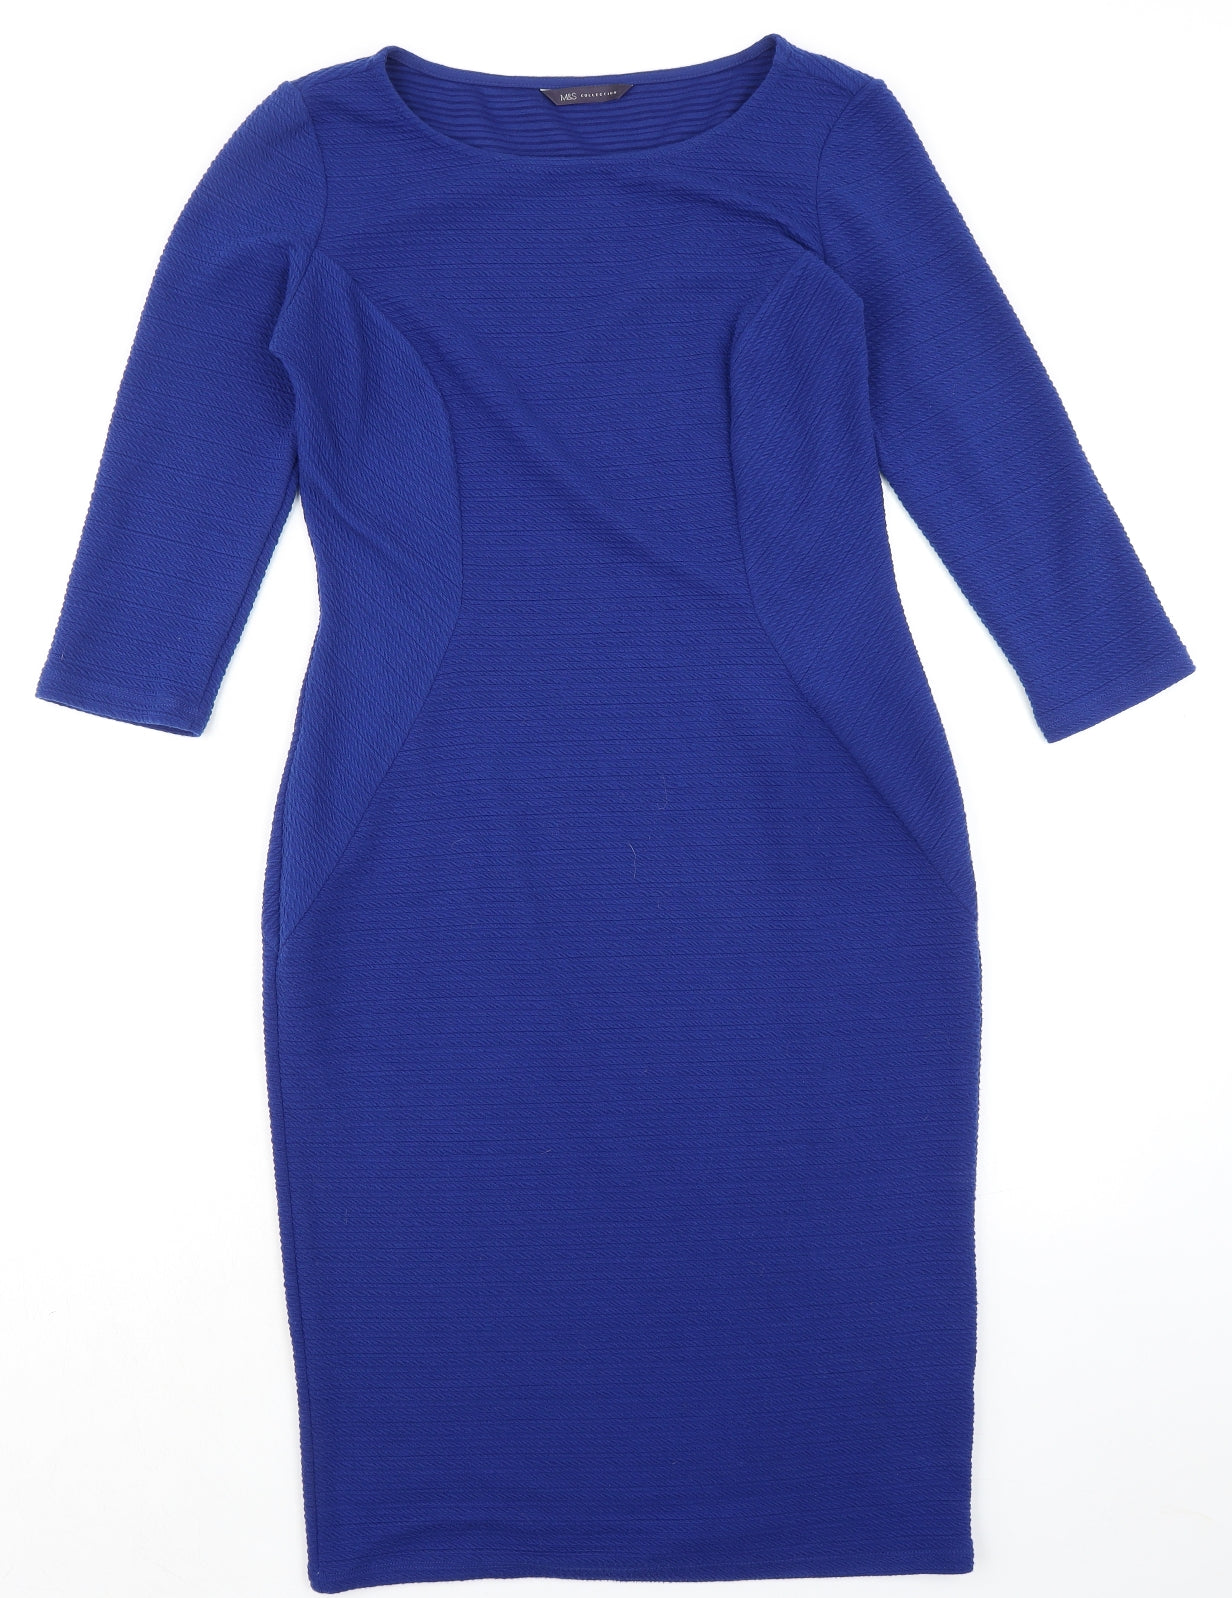 Marks and Spencer Womens Blue Polyester Pencil Dress Size 12 Boat Neck Pullover - Panelling